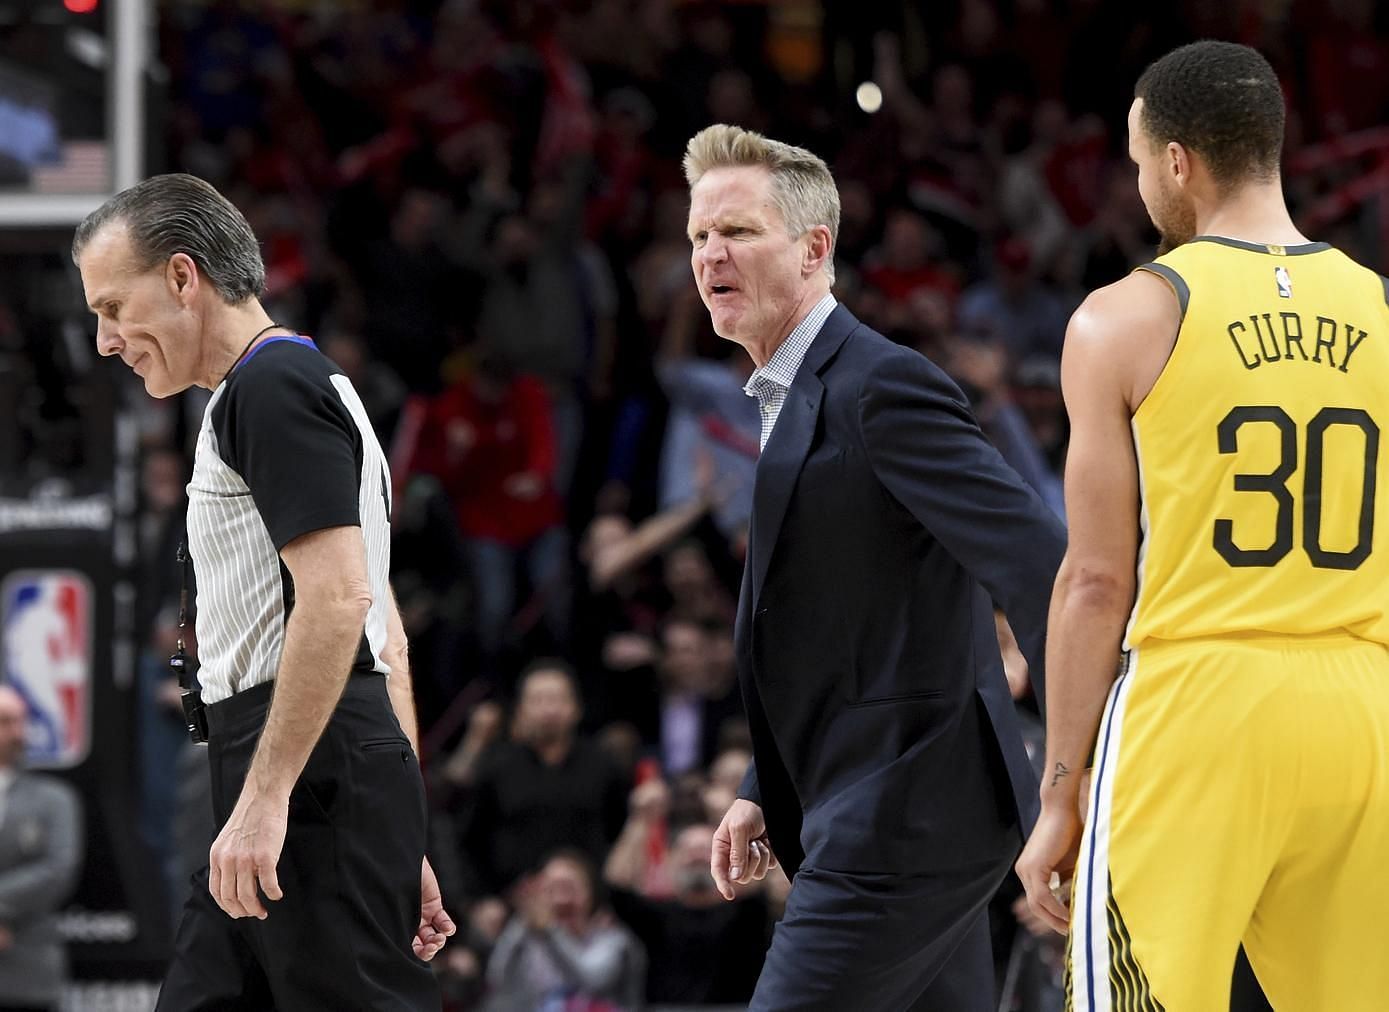 Golden State Warriors head coach Steve Kerr was tossed in the halftime break in their game versus the Memphis Grizzlies. [Photo: San Francisco Chronicle]